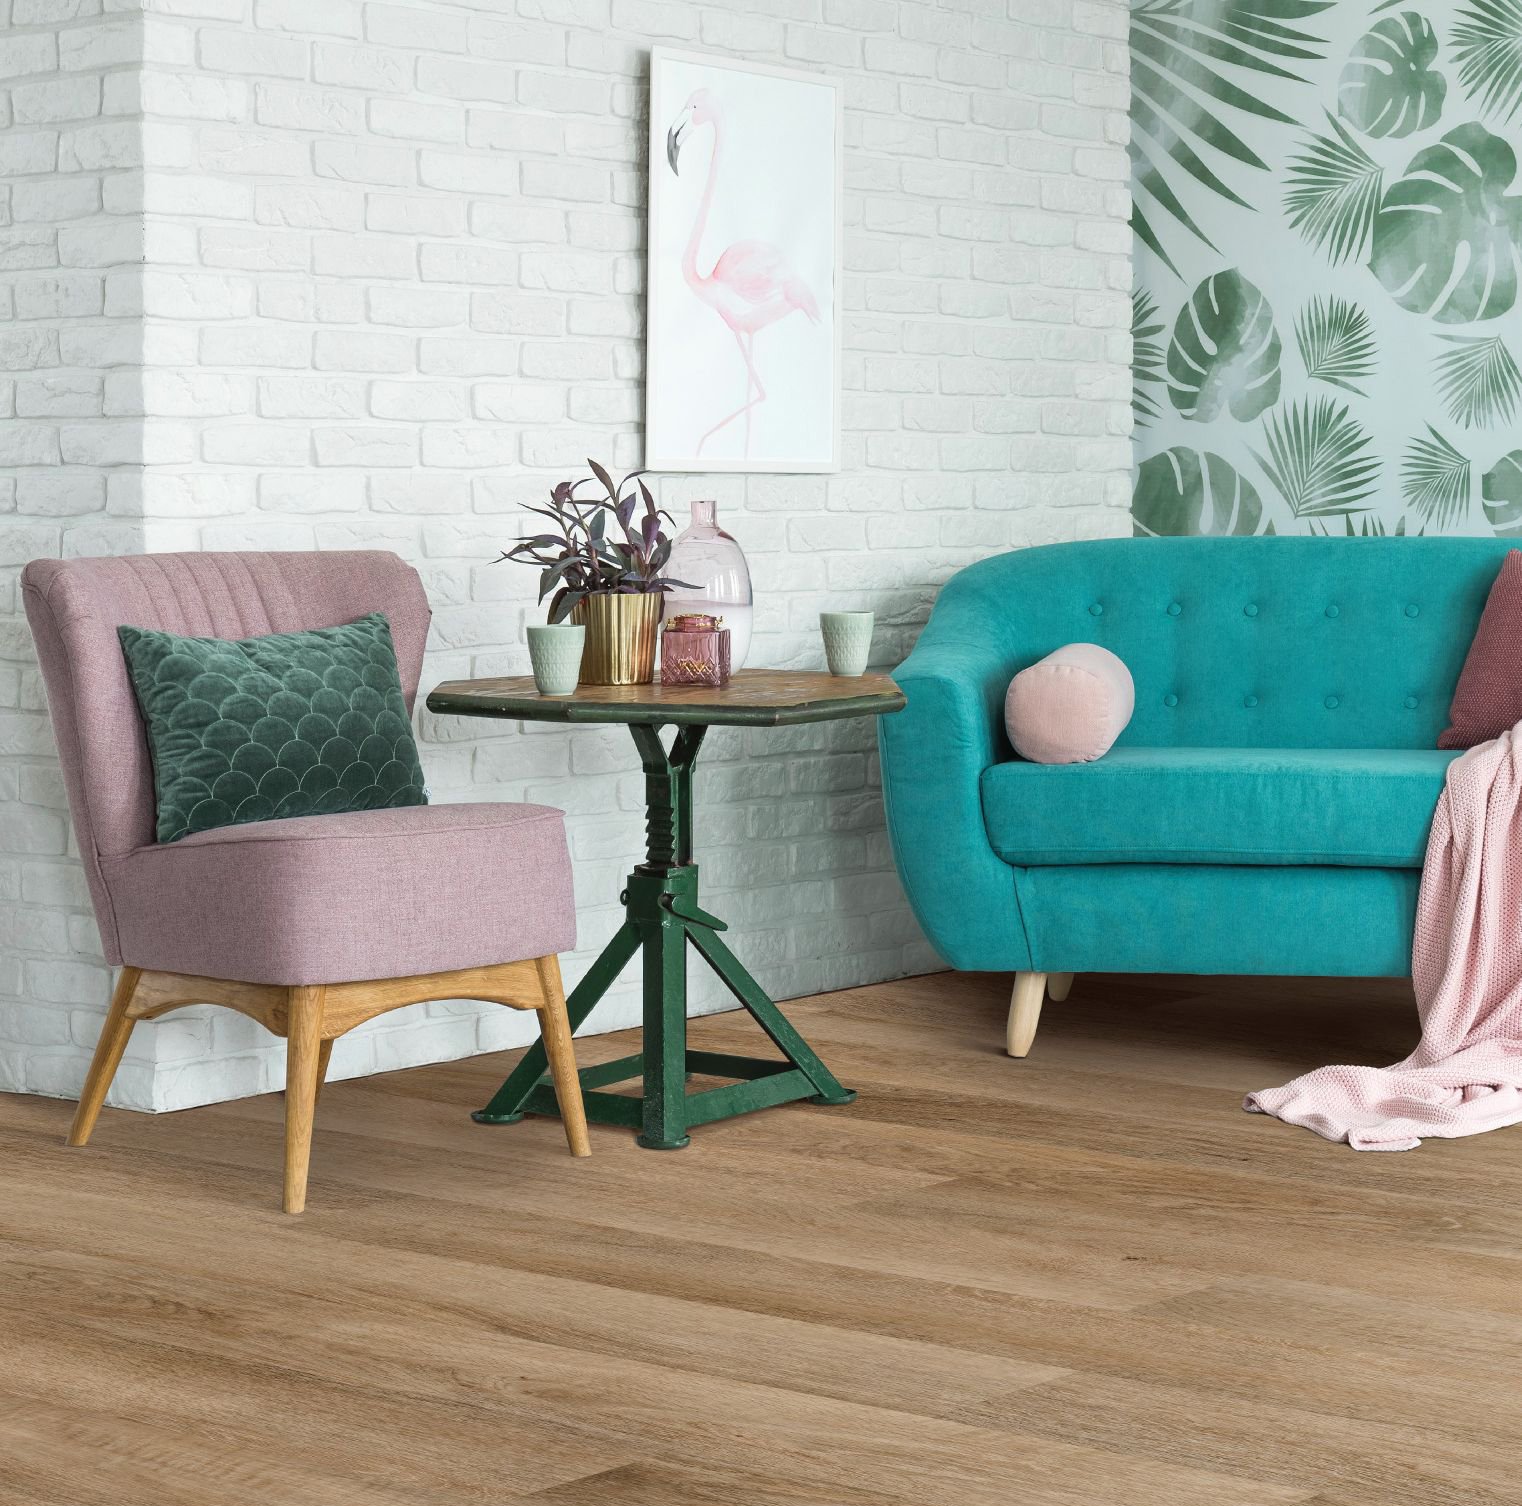 pink armchair and teal couch